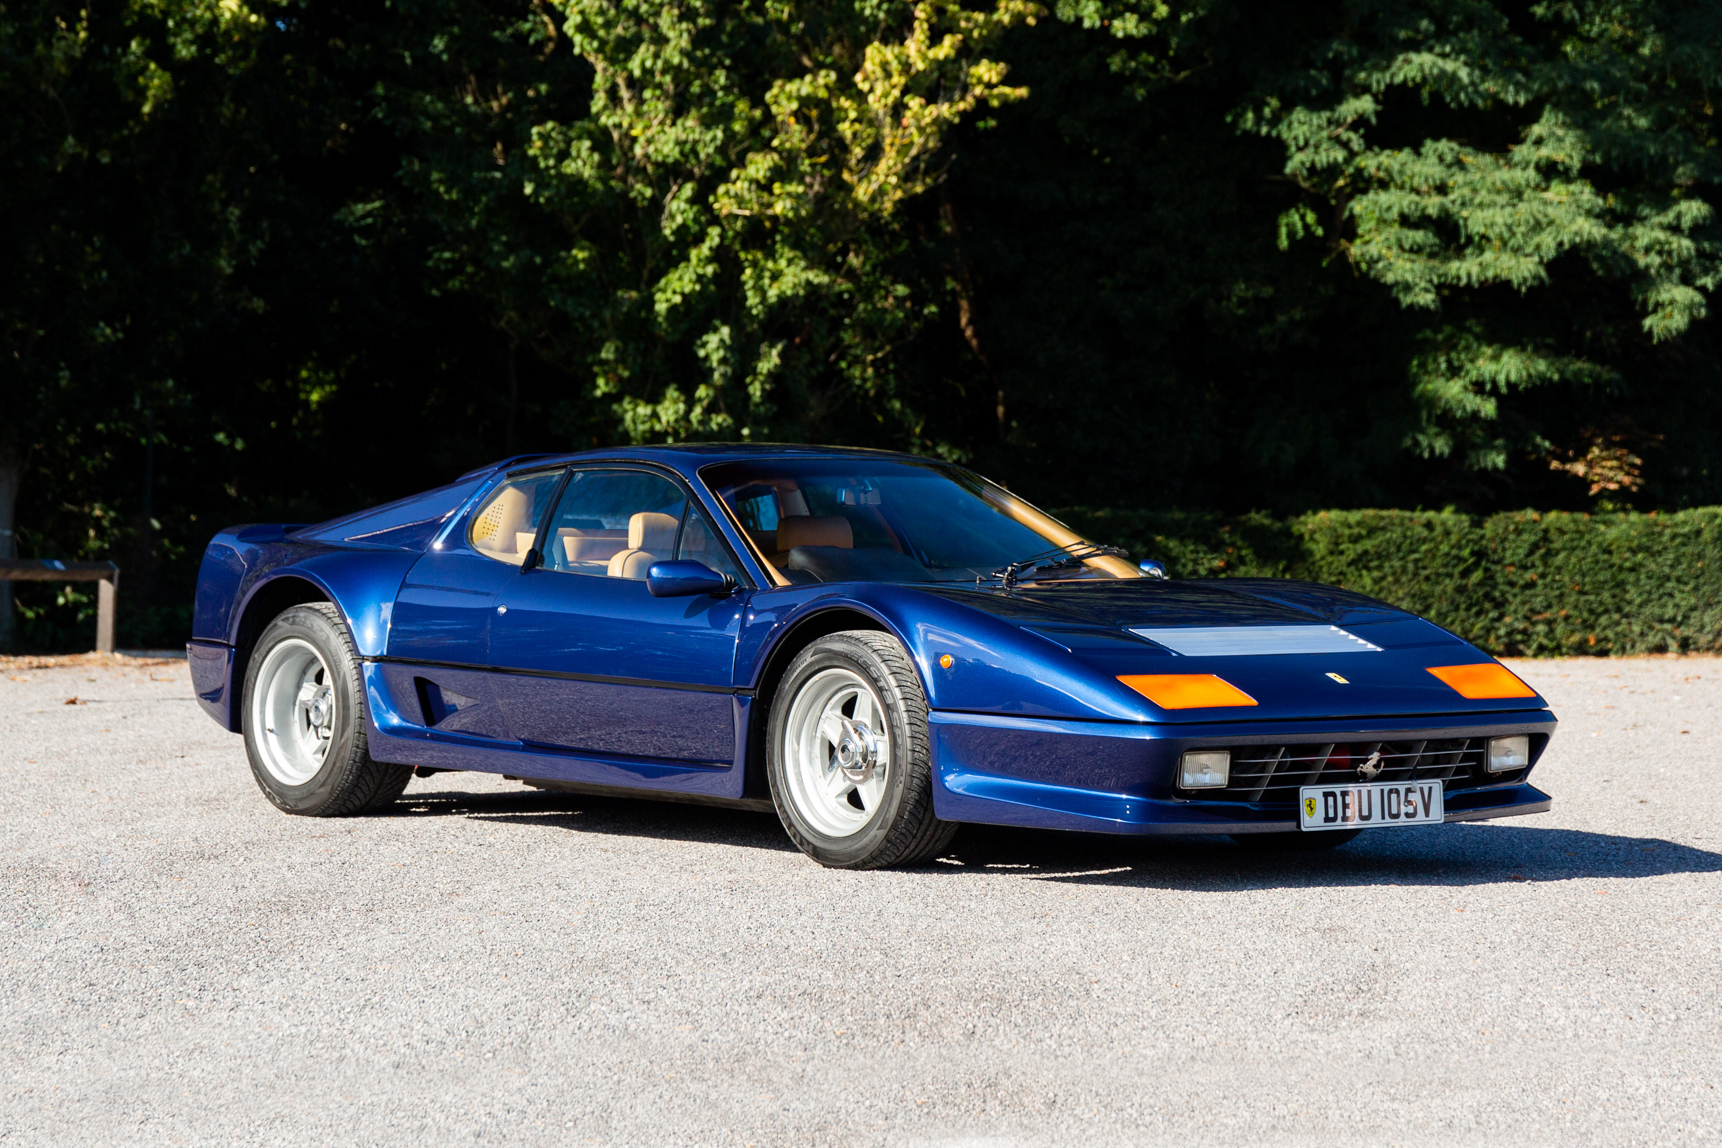 1980 FERRARI 512BB - ZENDER for sale by auction in Ascot 